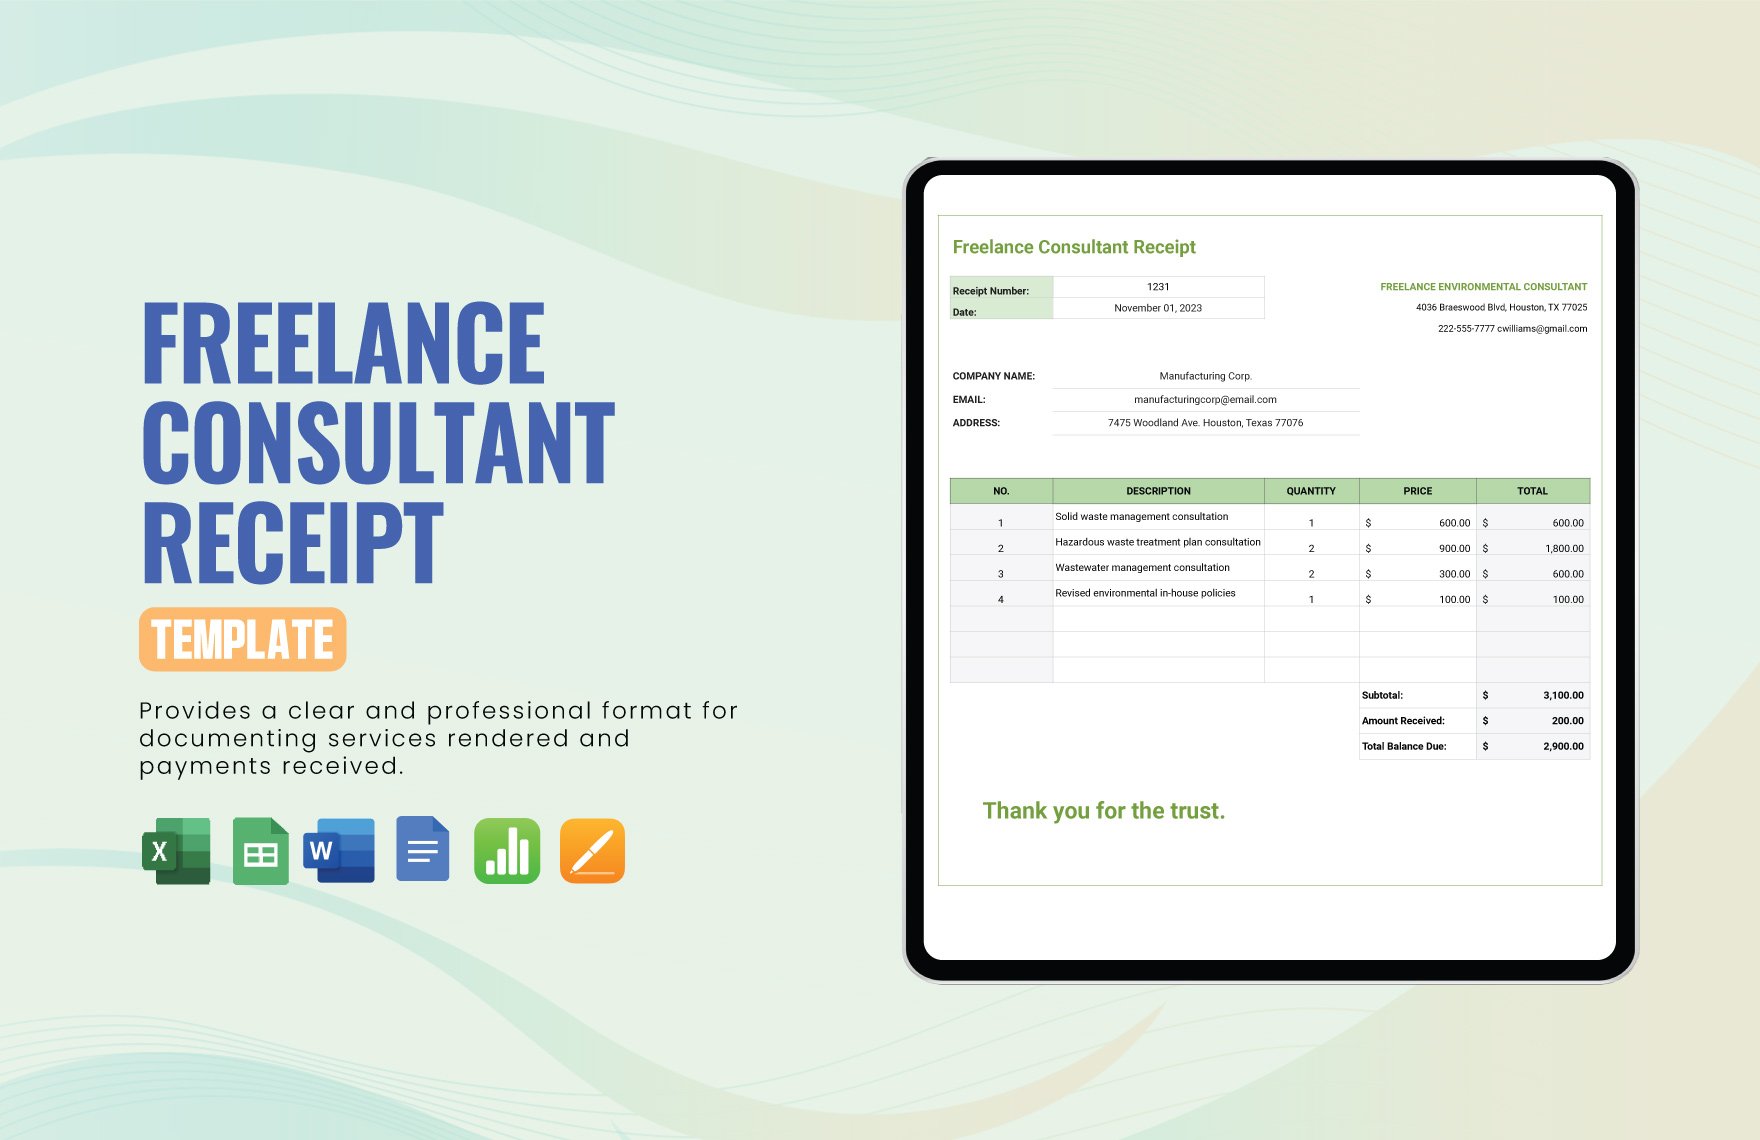 Freelance Consultant Receipt Template in Word, Google Docs, Excel, Google Sheets, Apple Pages, Apple Numbers